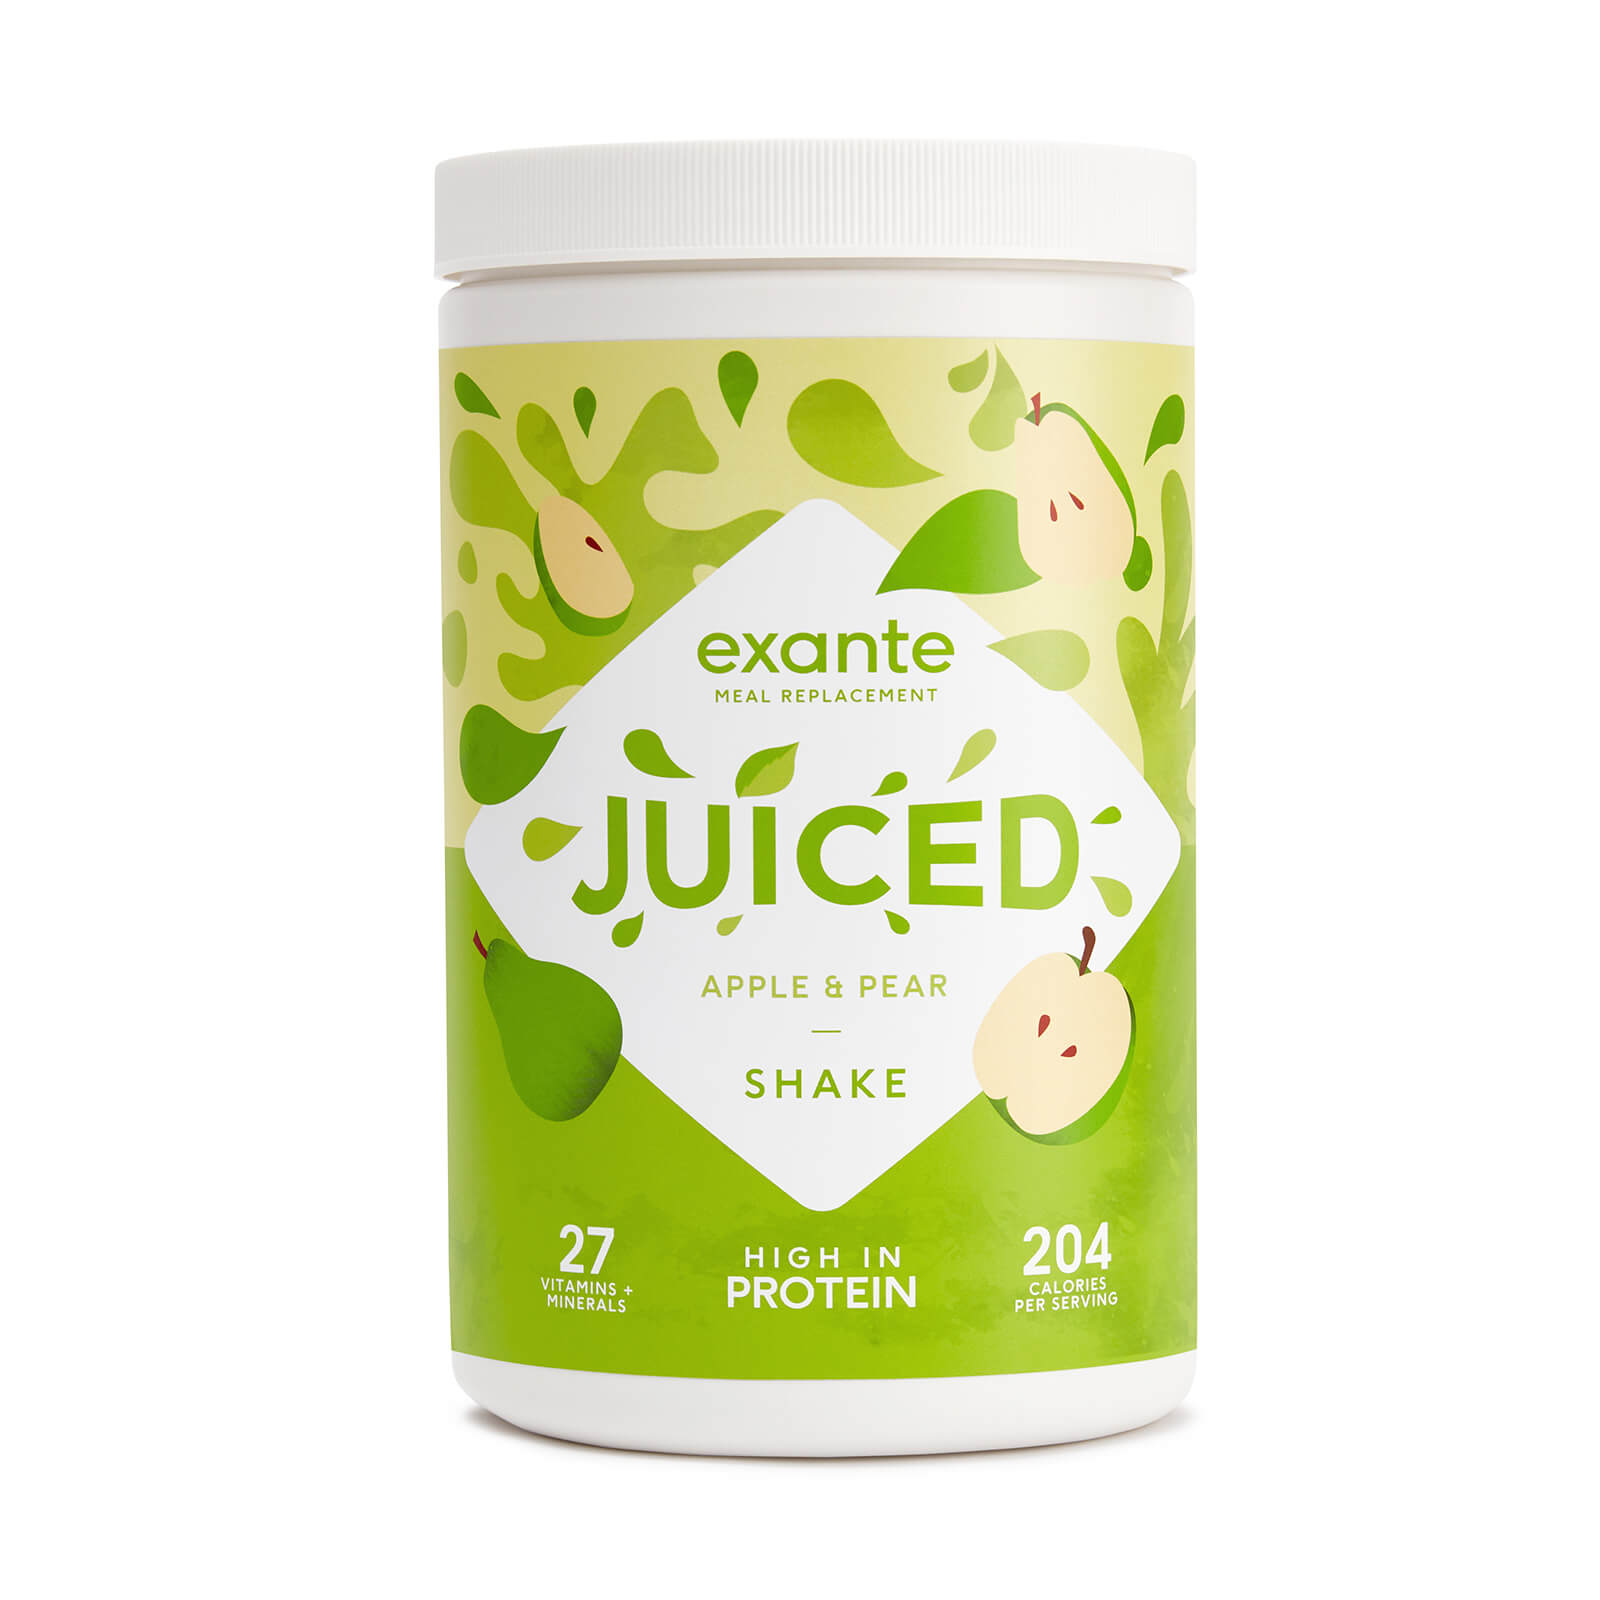 exante Diet Apple & Pear JUICED Meal Replacement Shake 10 Serve Tub